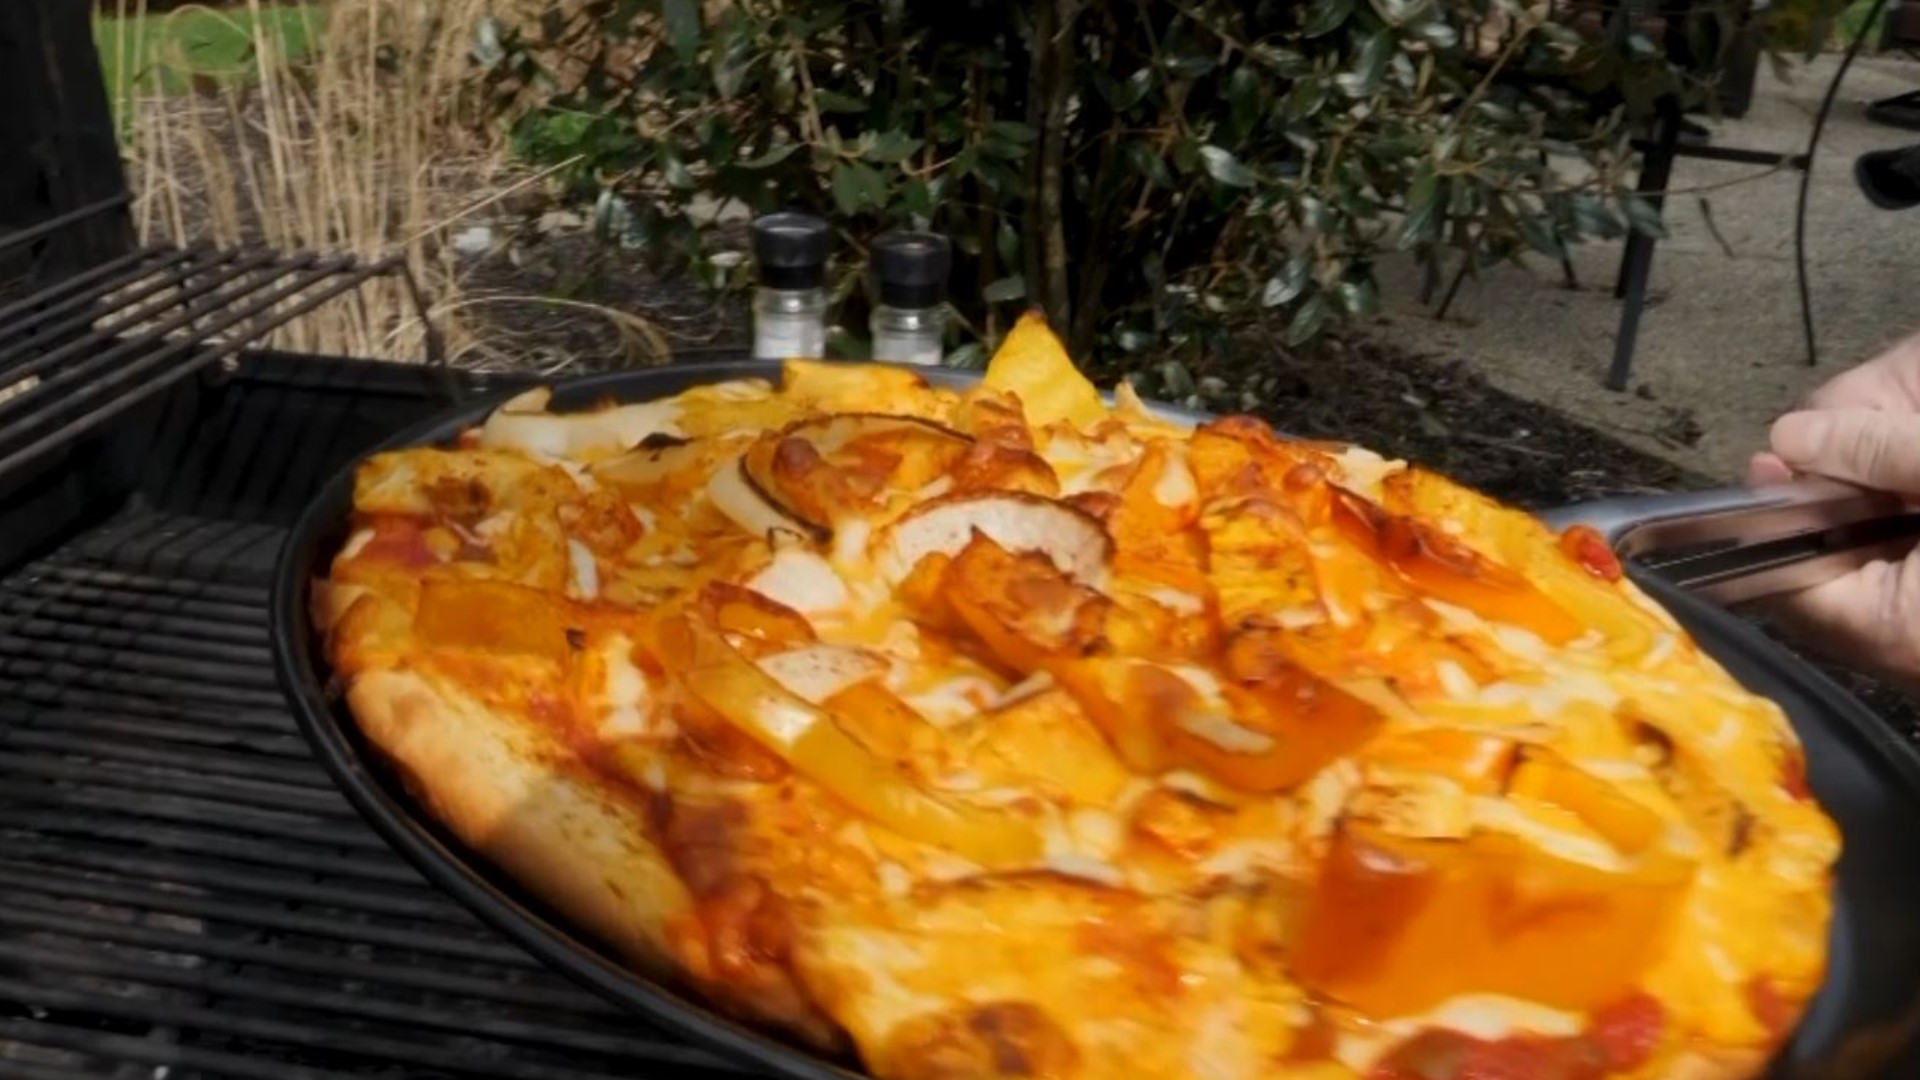 Dom Tiberi makes a Southwestern-style pizza on the grill.